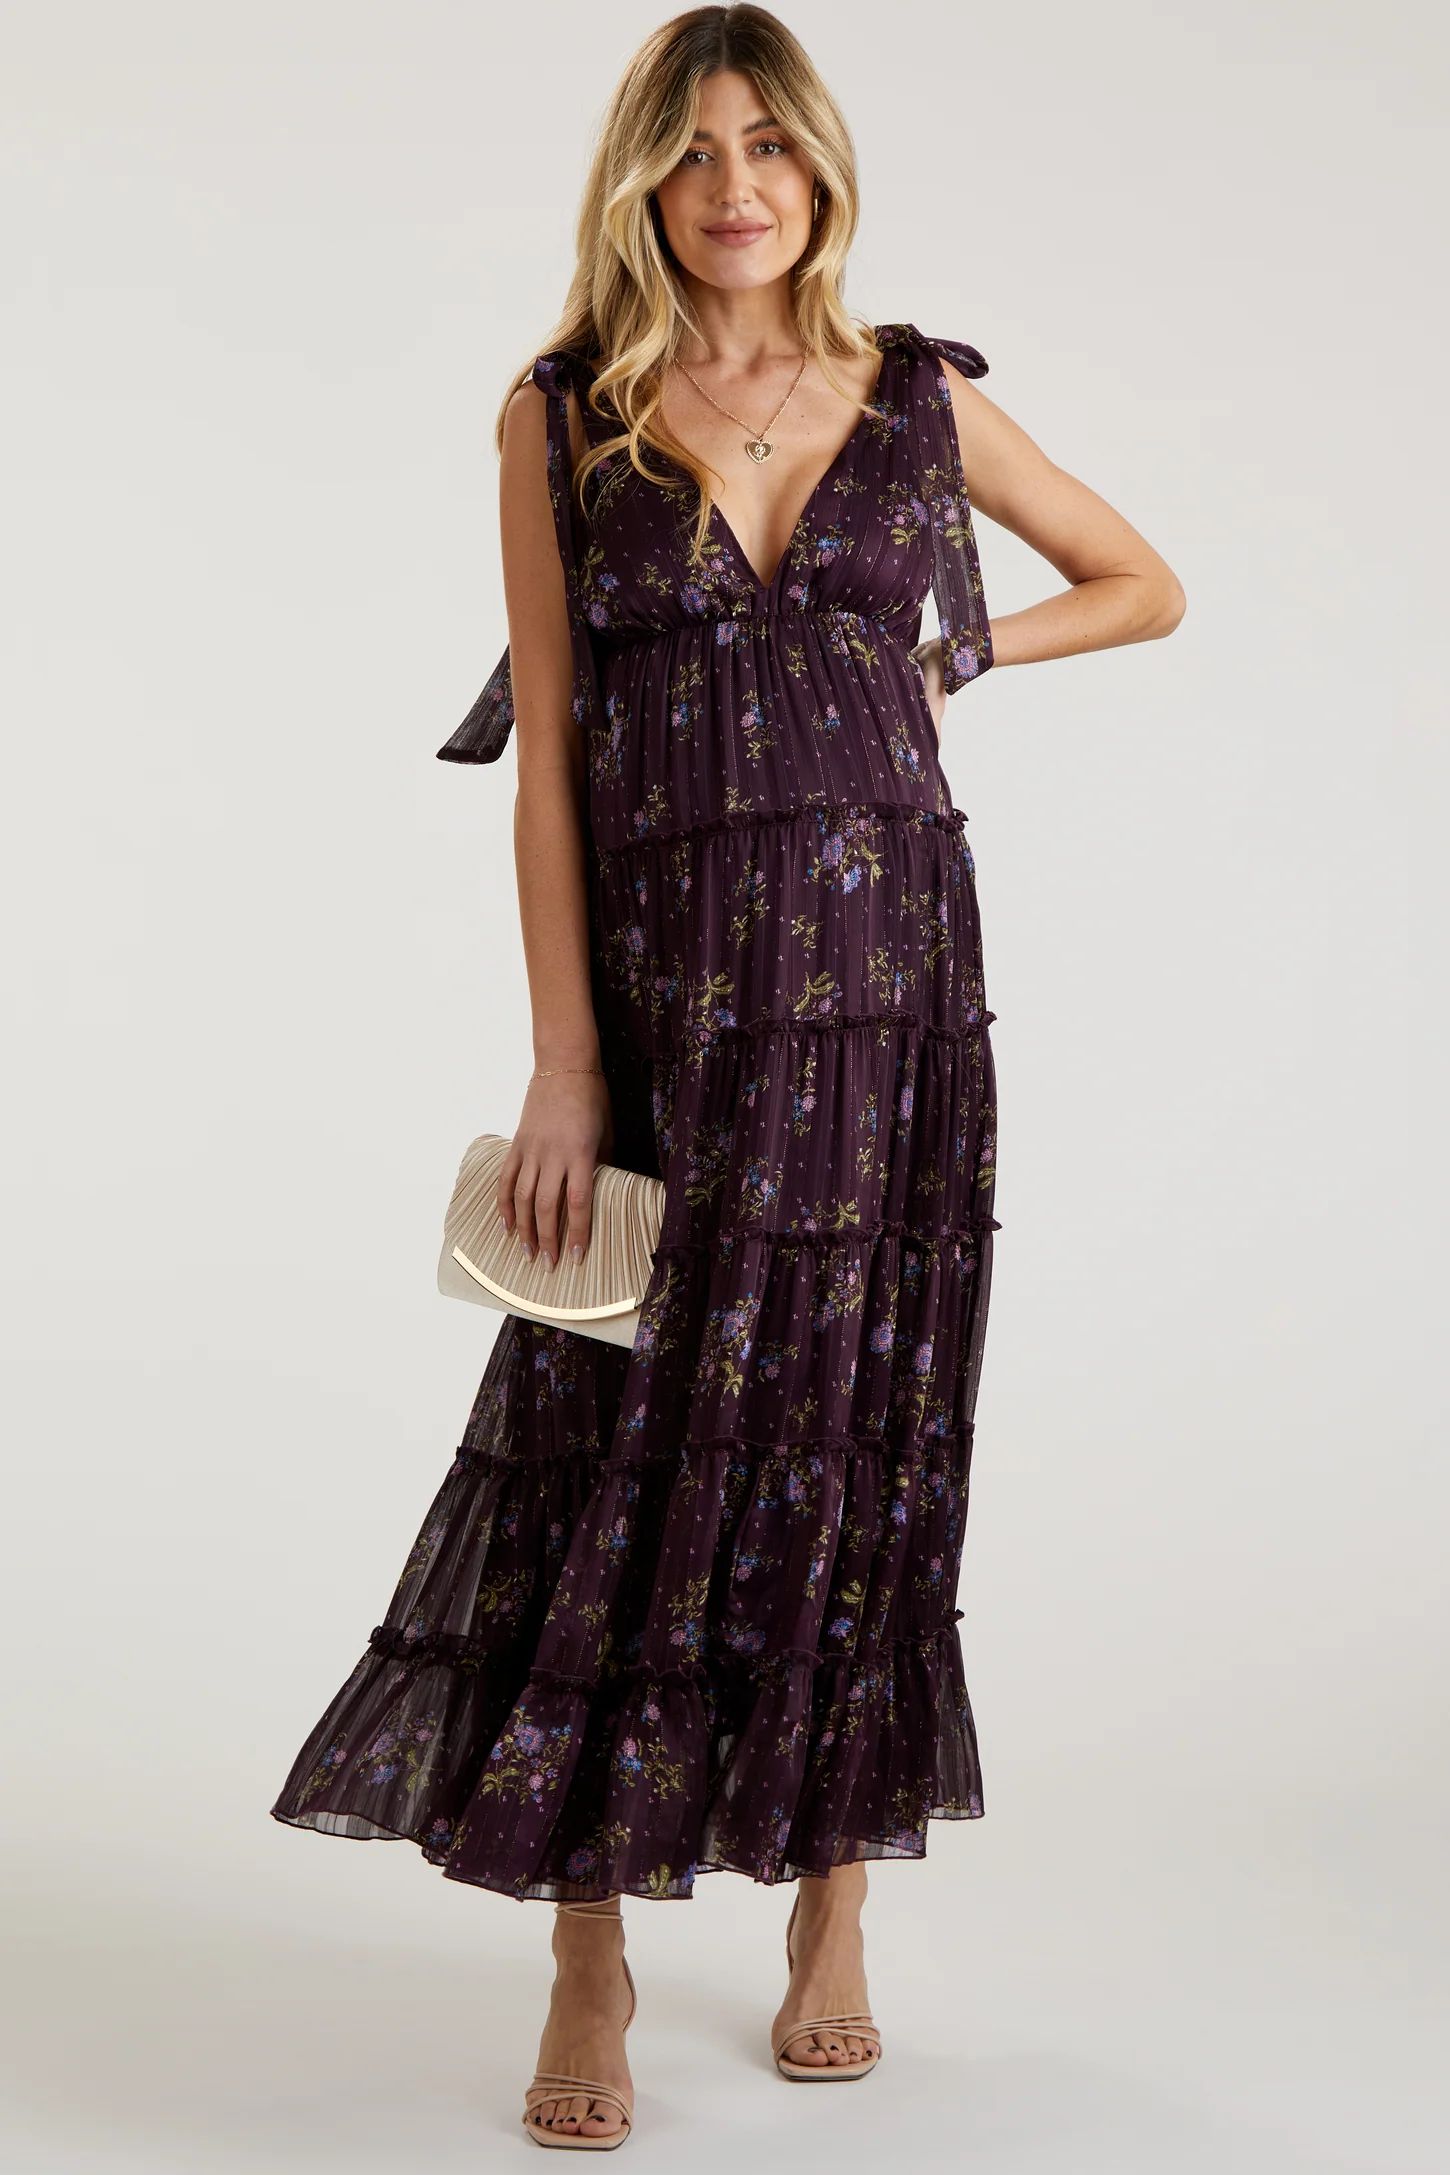 Plum Floral Tiered Shoulder Tie Maternity Maxi Dress | PinkBlush Maternity